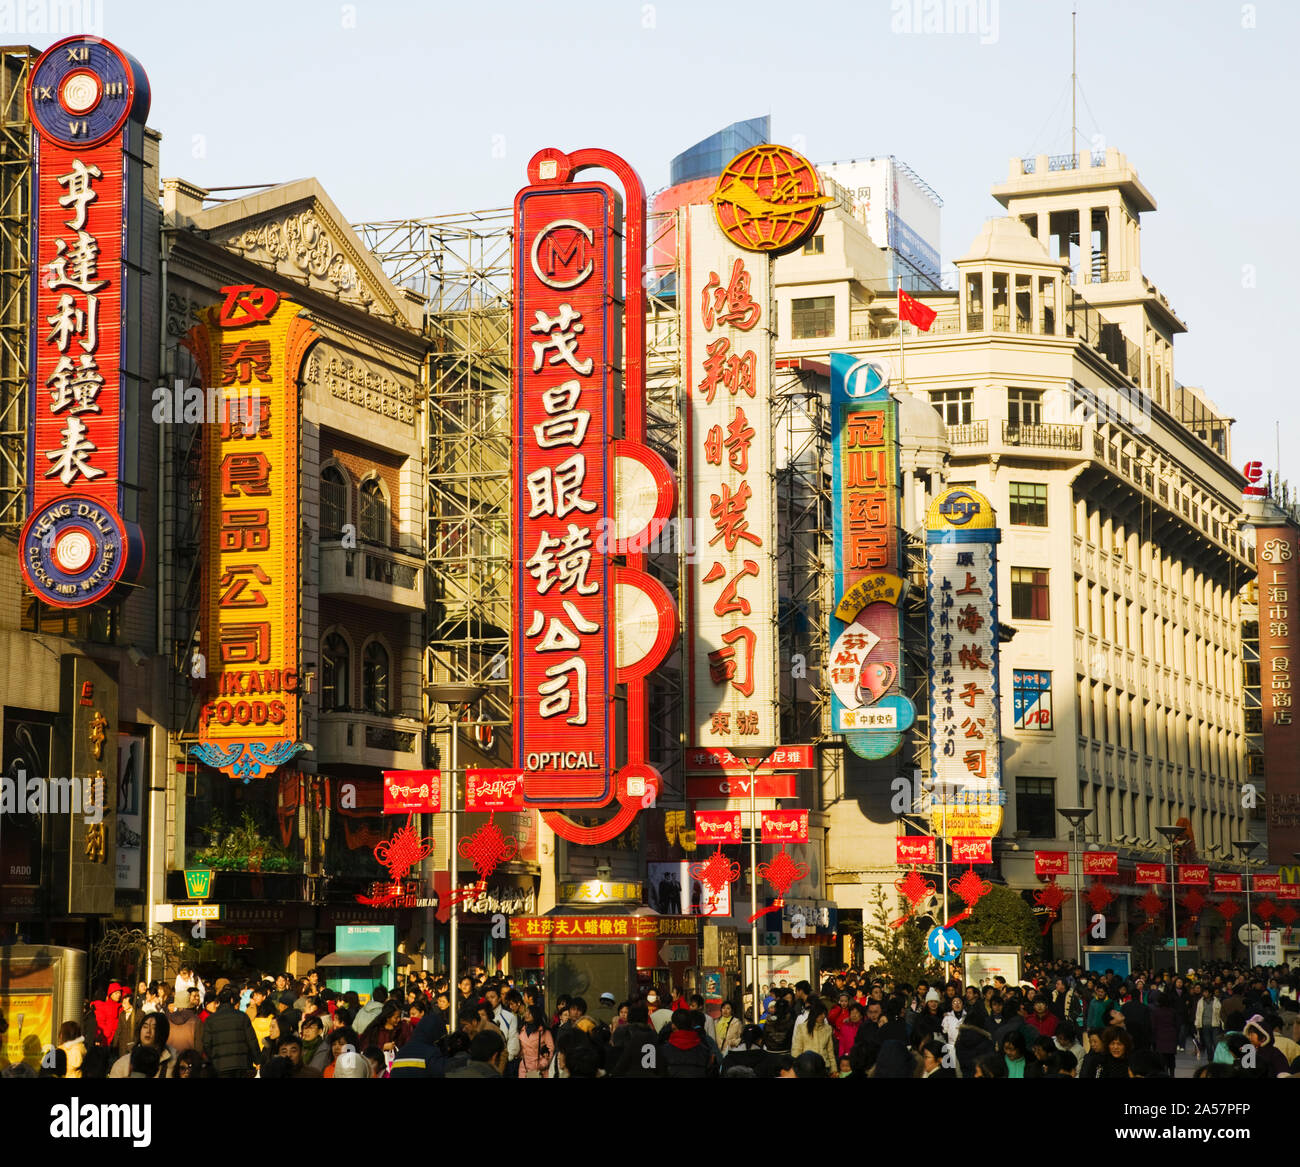 Store signs on East Nanjing Road, Shanghai, China Stock Photo